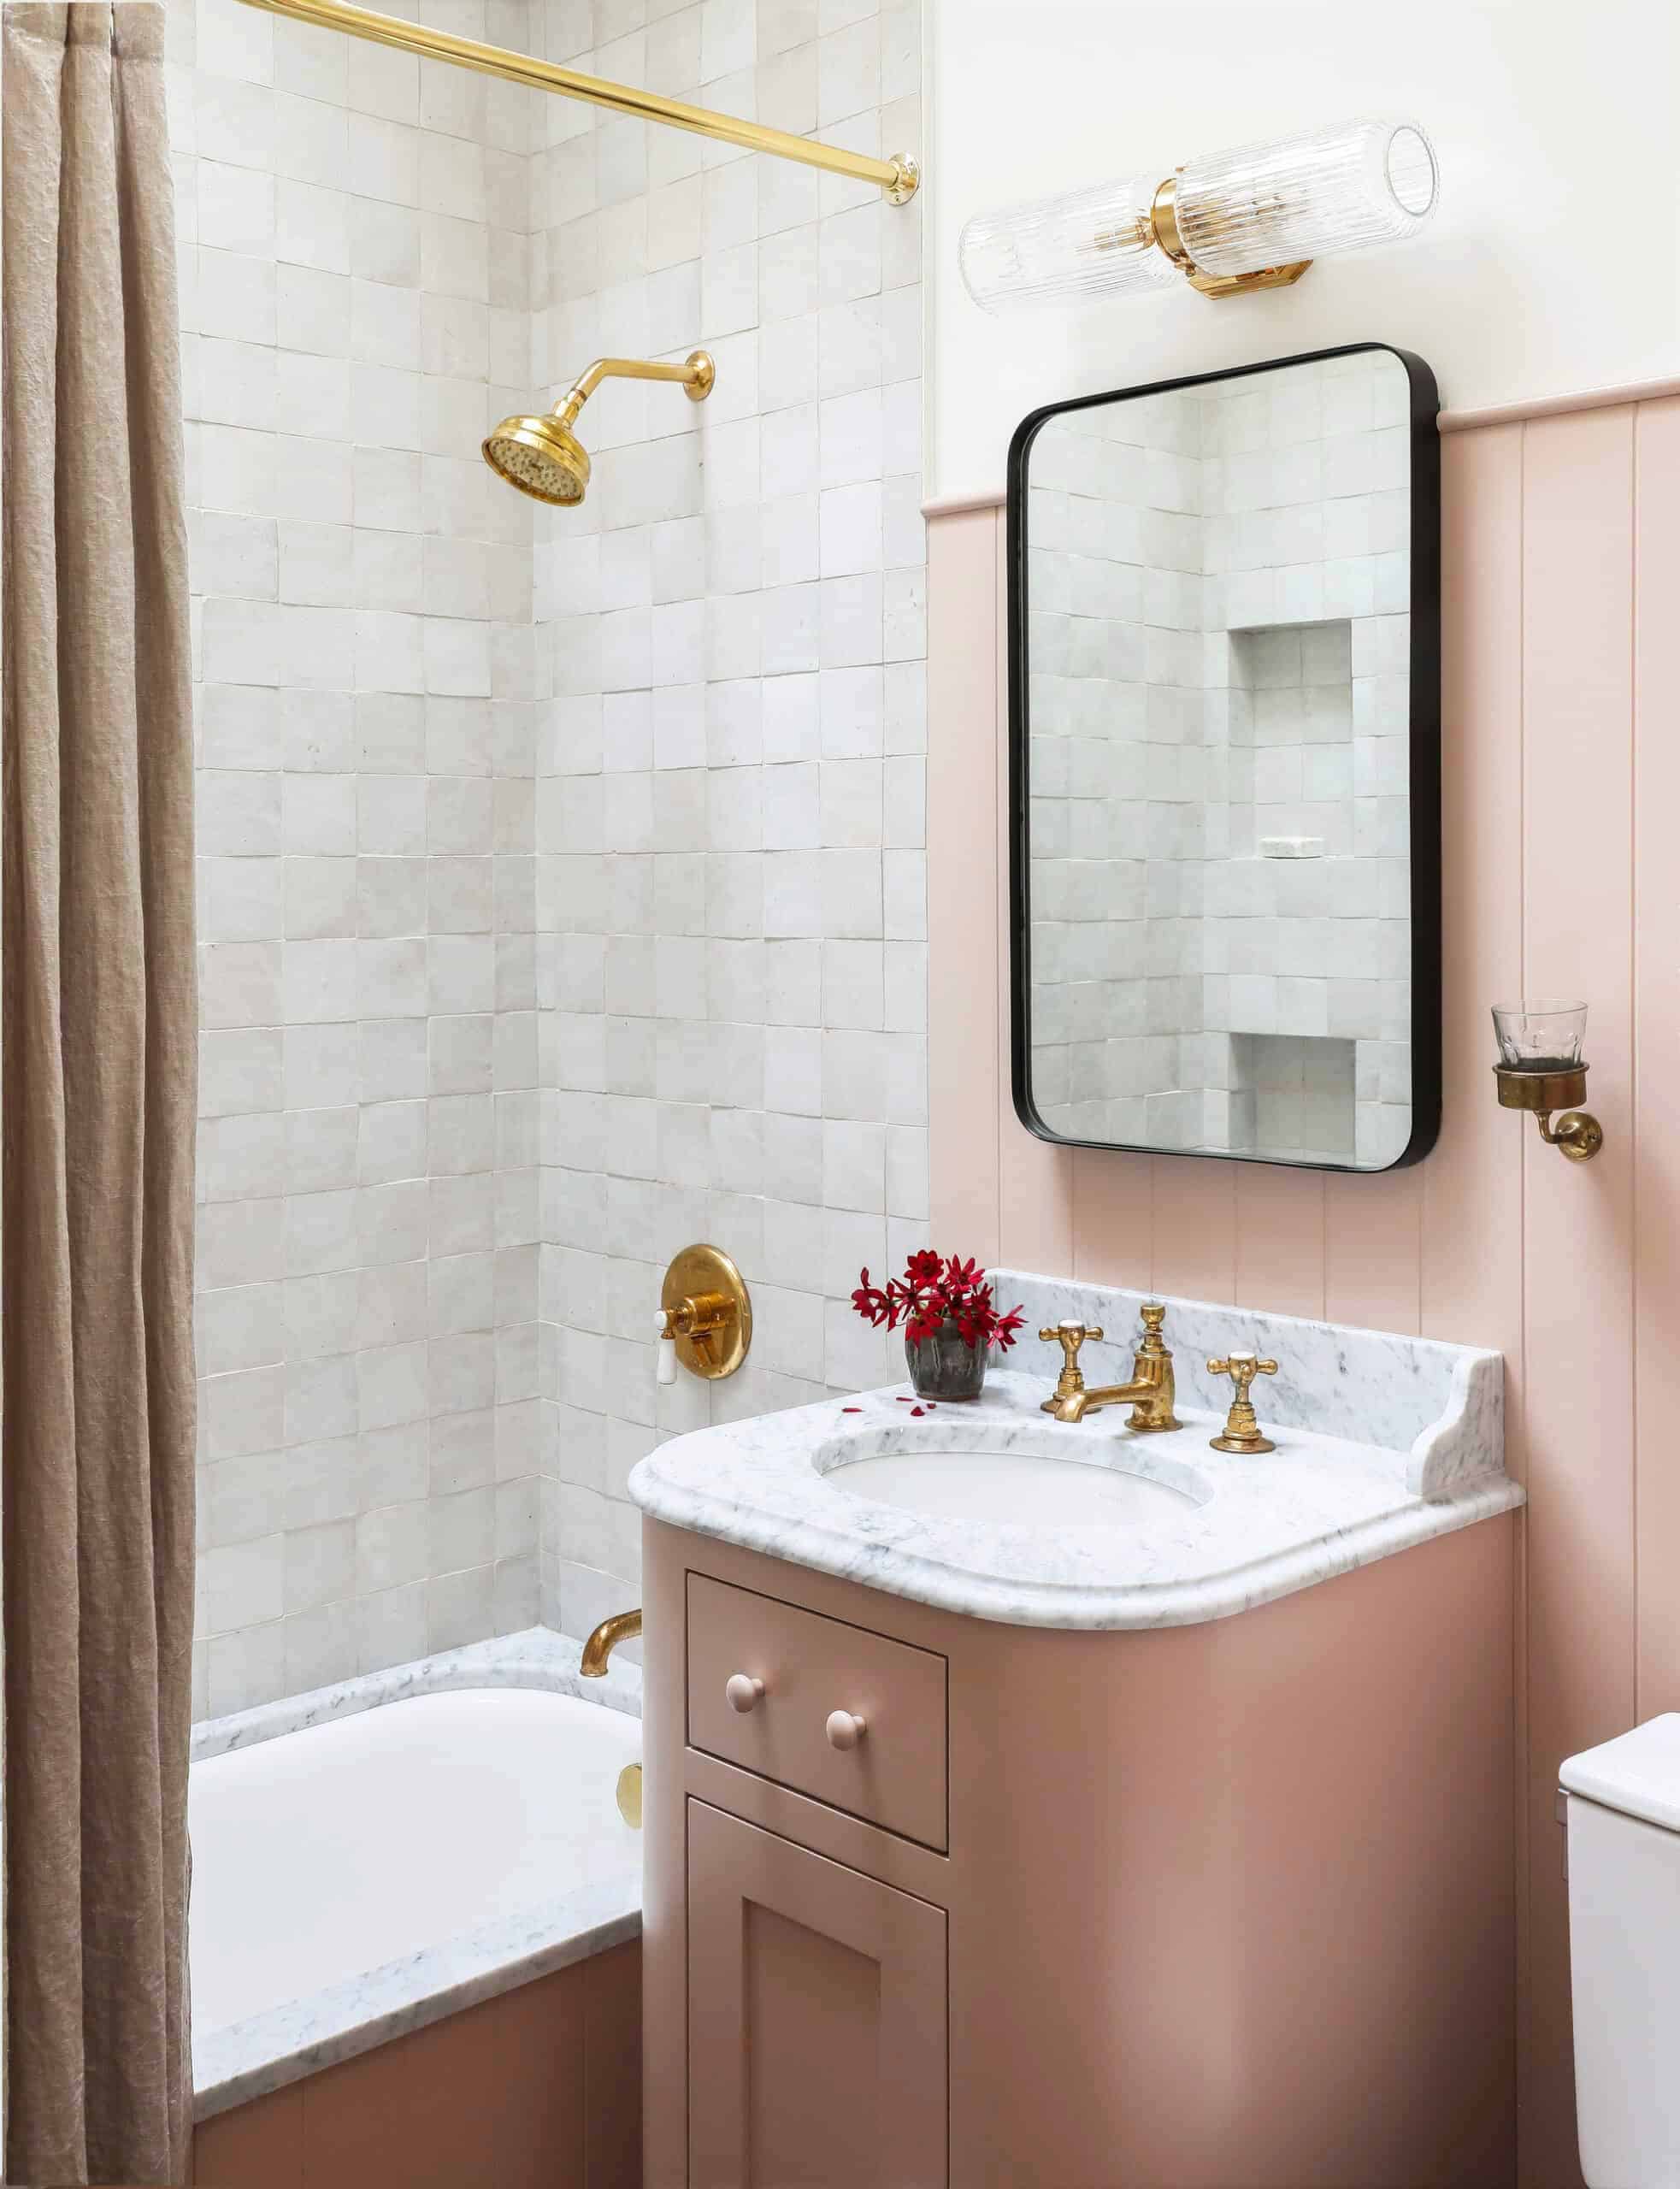 The Best 16 Small Bathroom Trends 2021 That Are Rule-Breaking